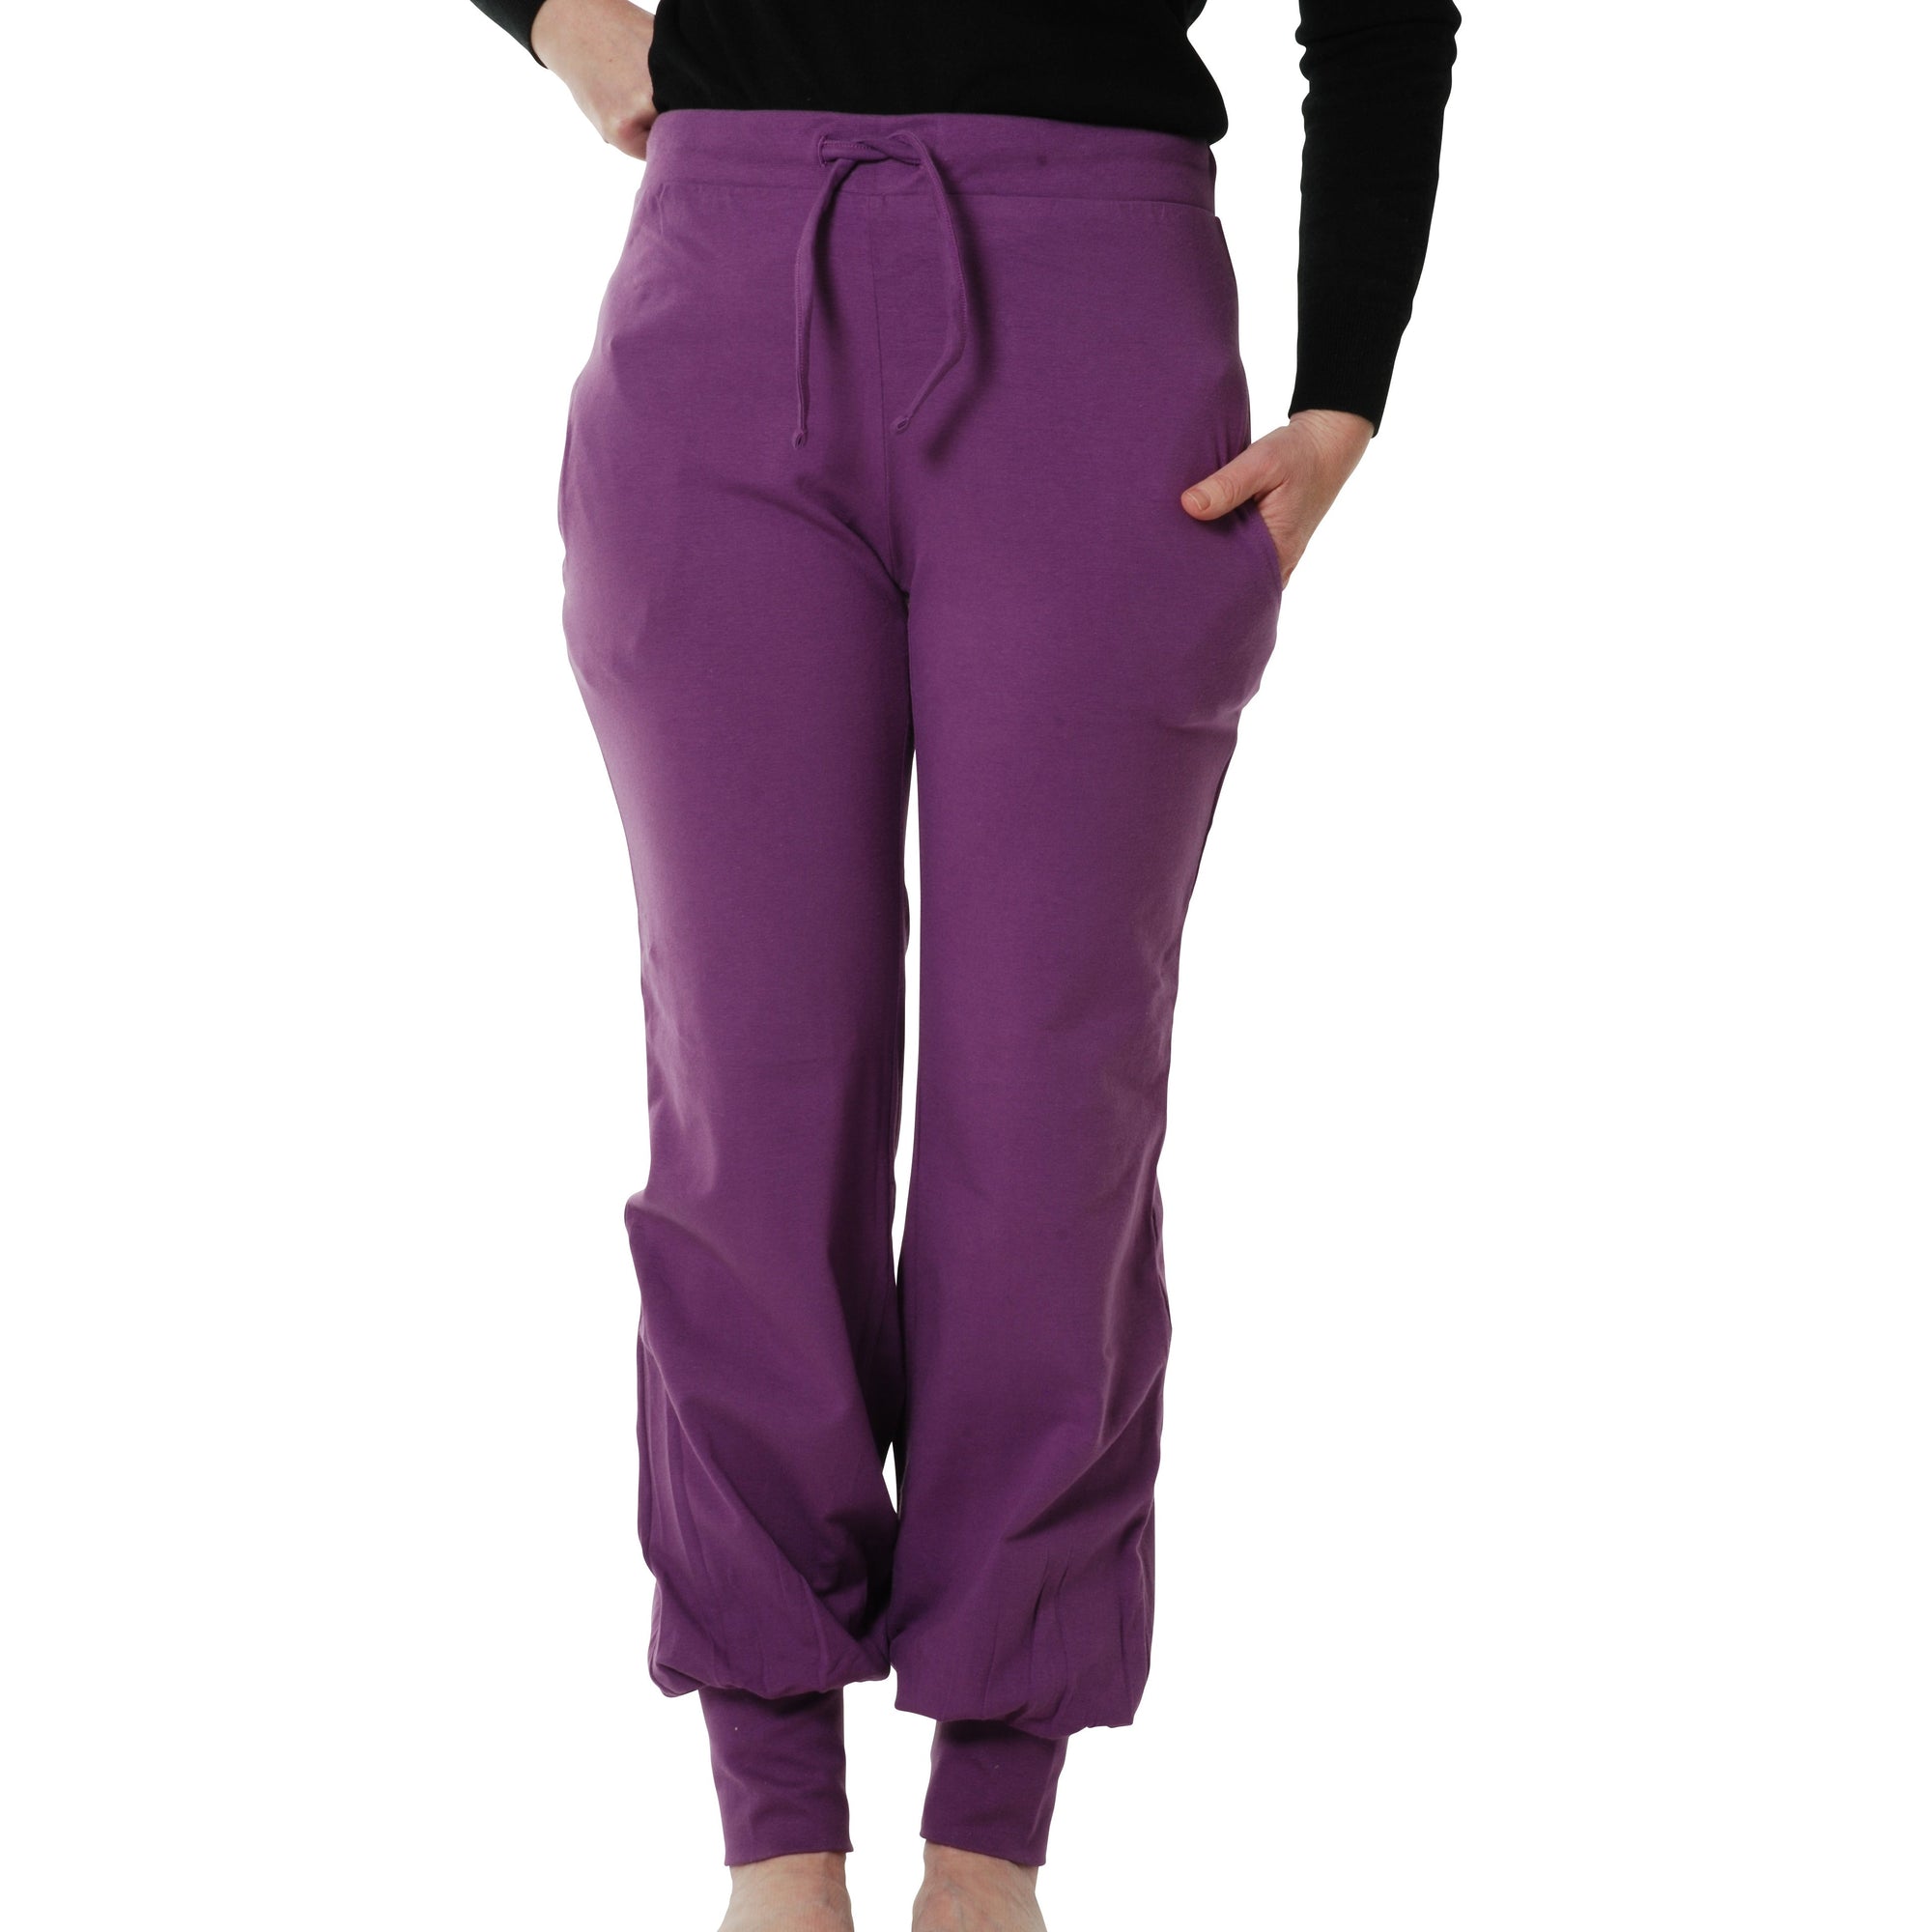 Adult's Crushed Grape Baggy Pants - 2 Left Size XS & L-More Than A Fling-Modern Rascals